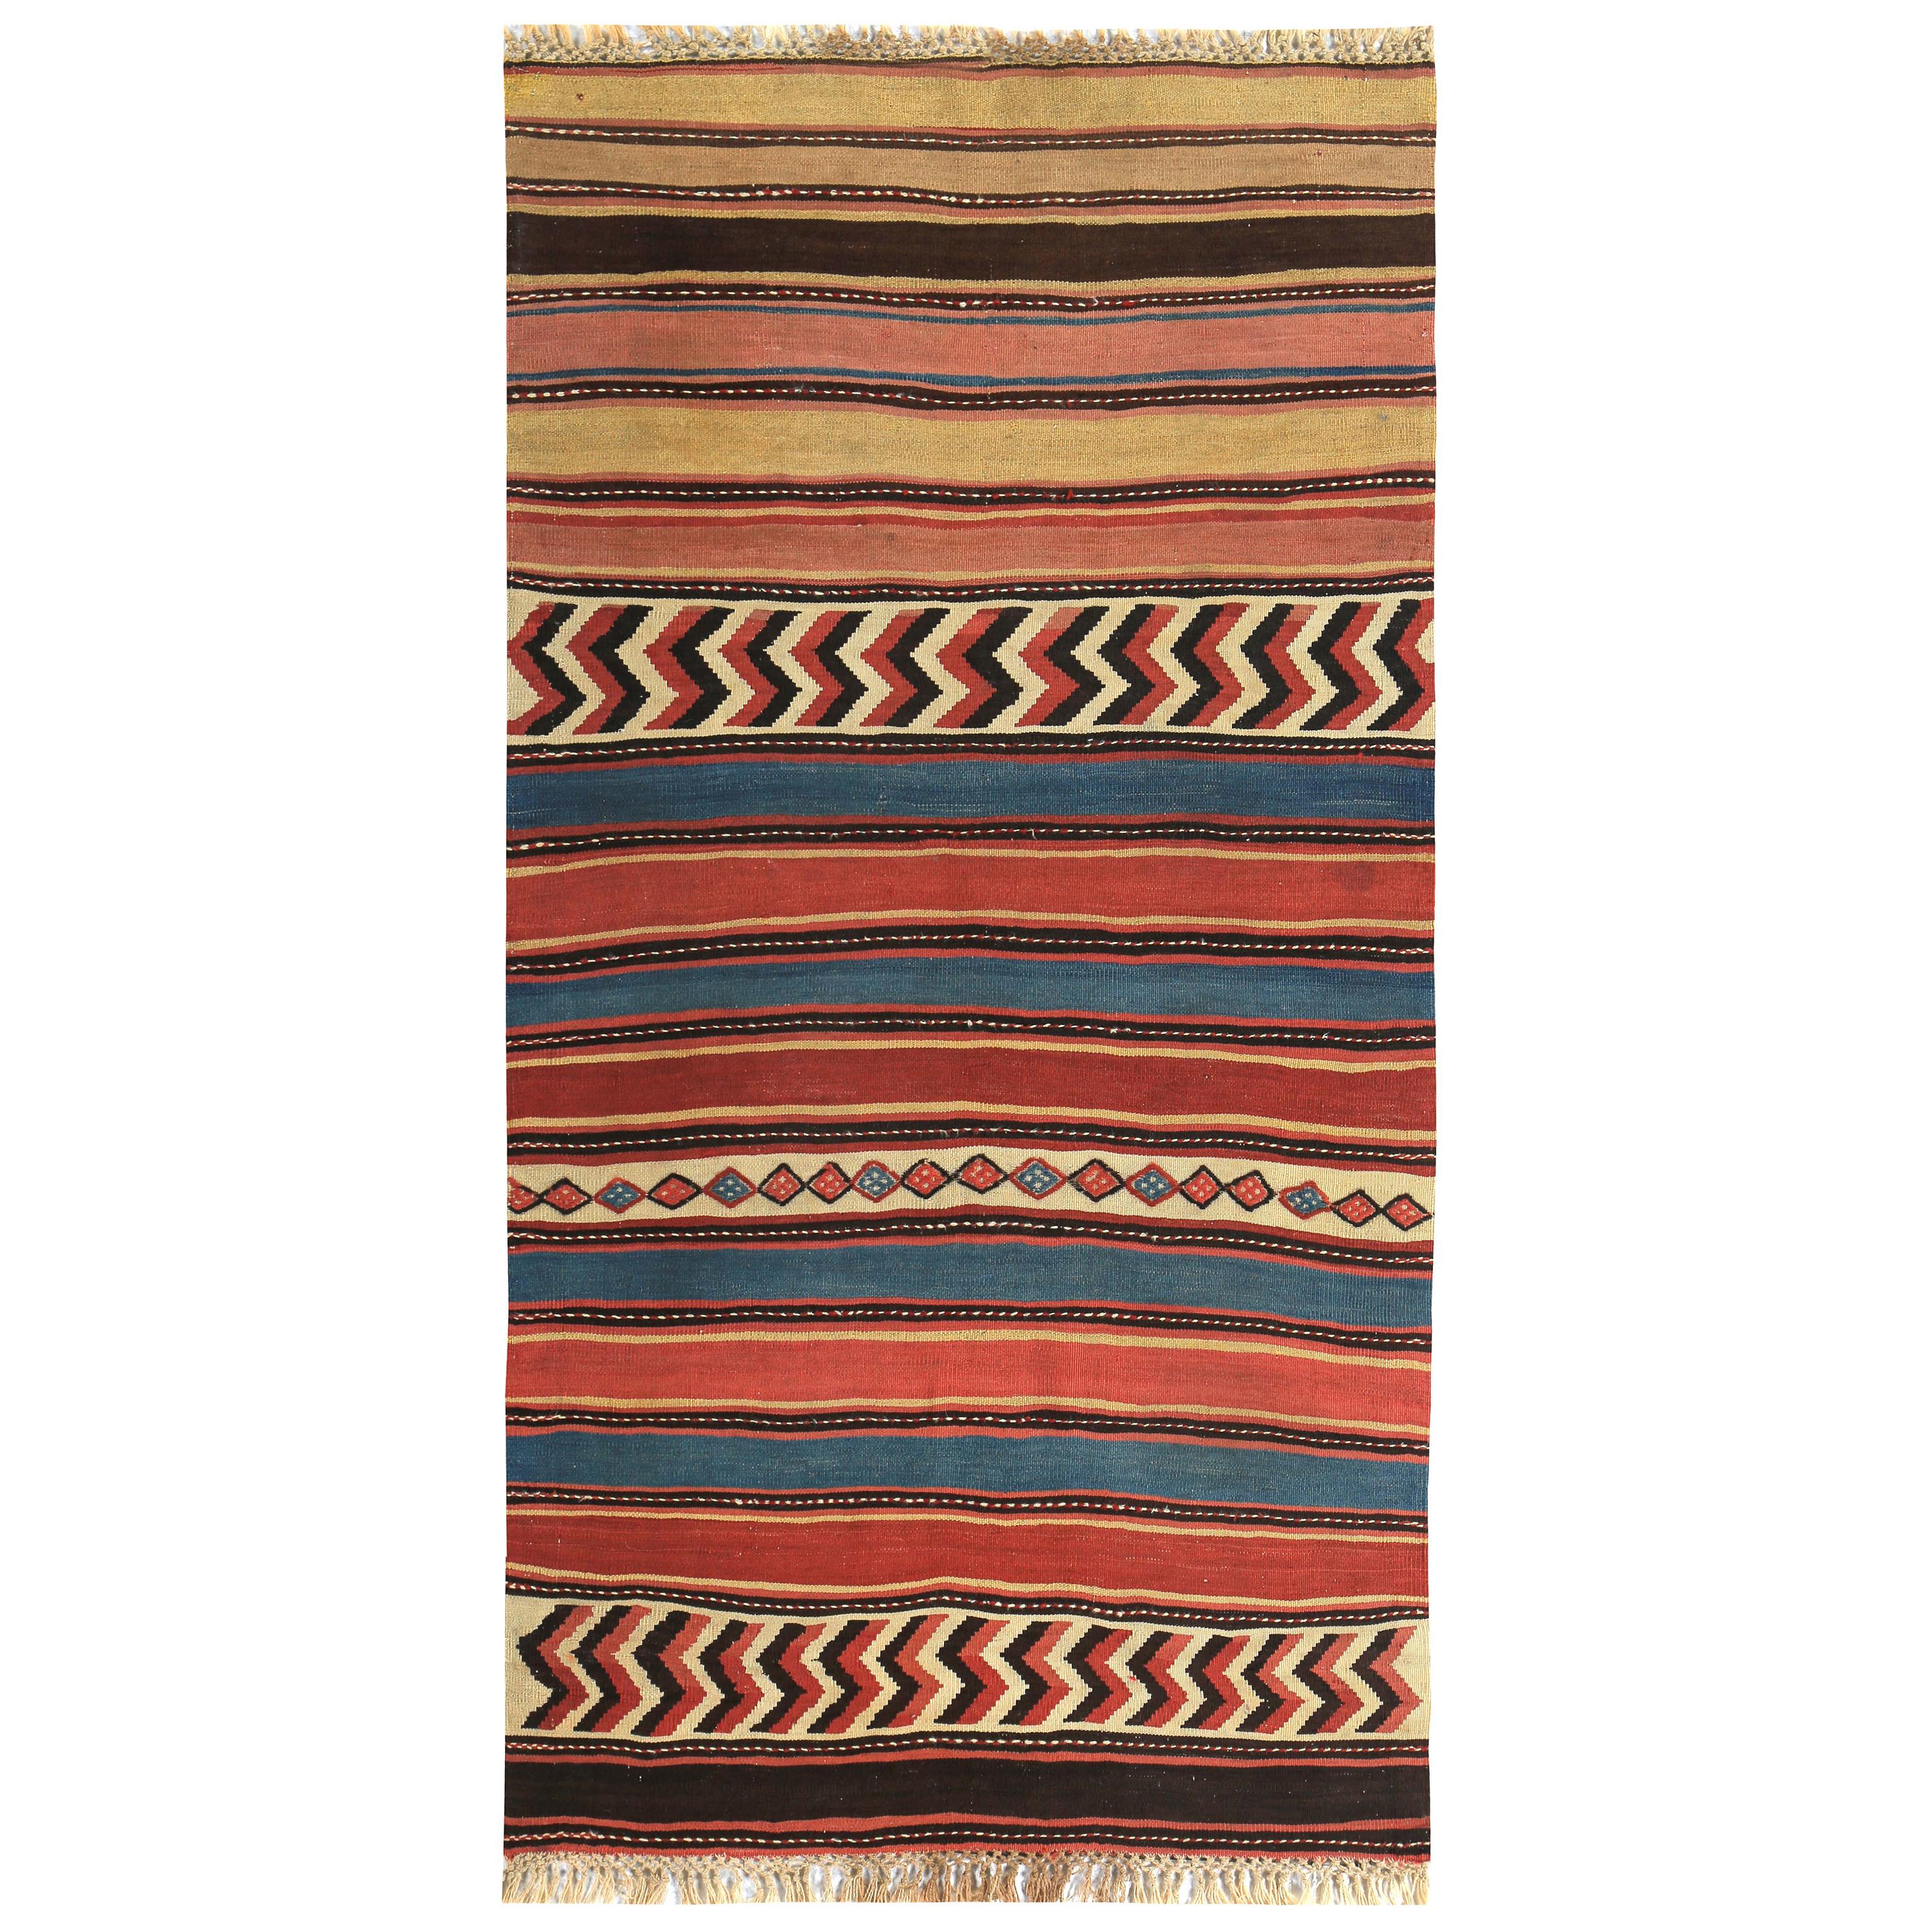 Modern Turkish Kilim Rug with Red and Blue Tribal Design on Beige Field